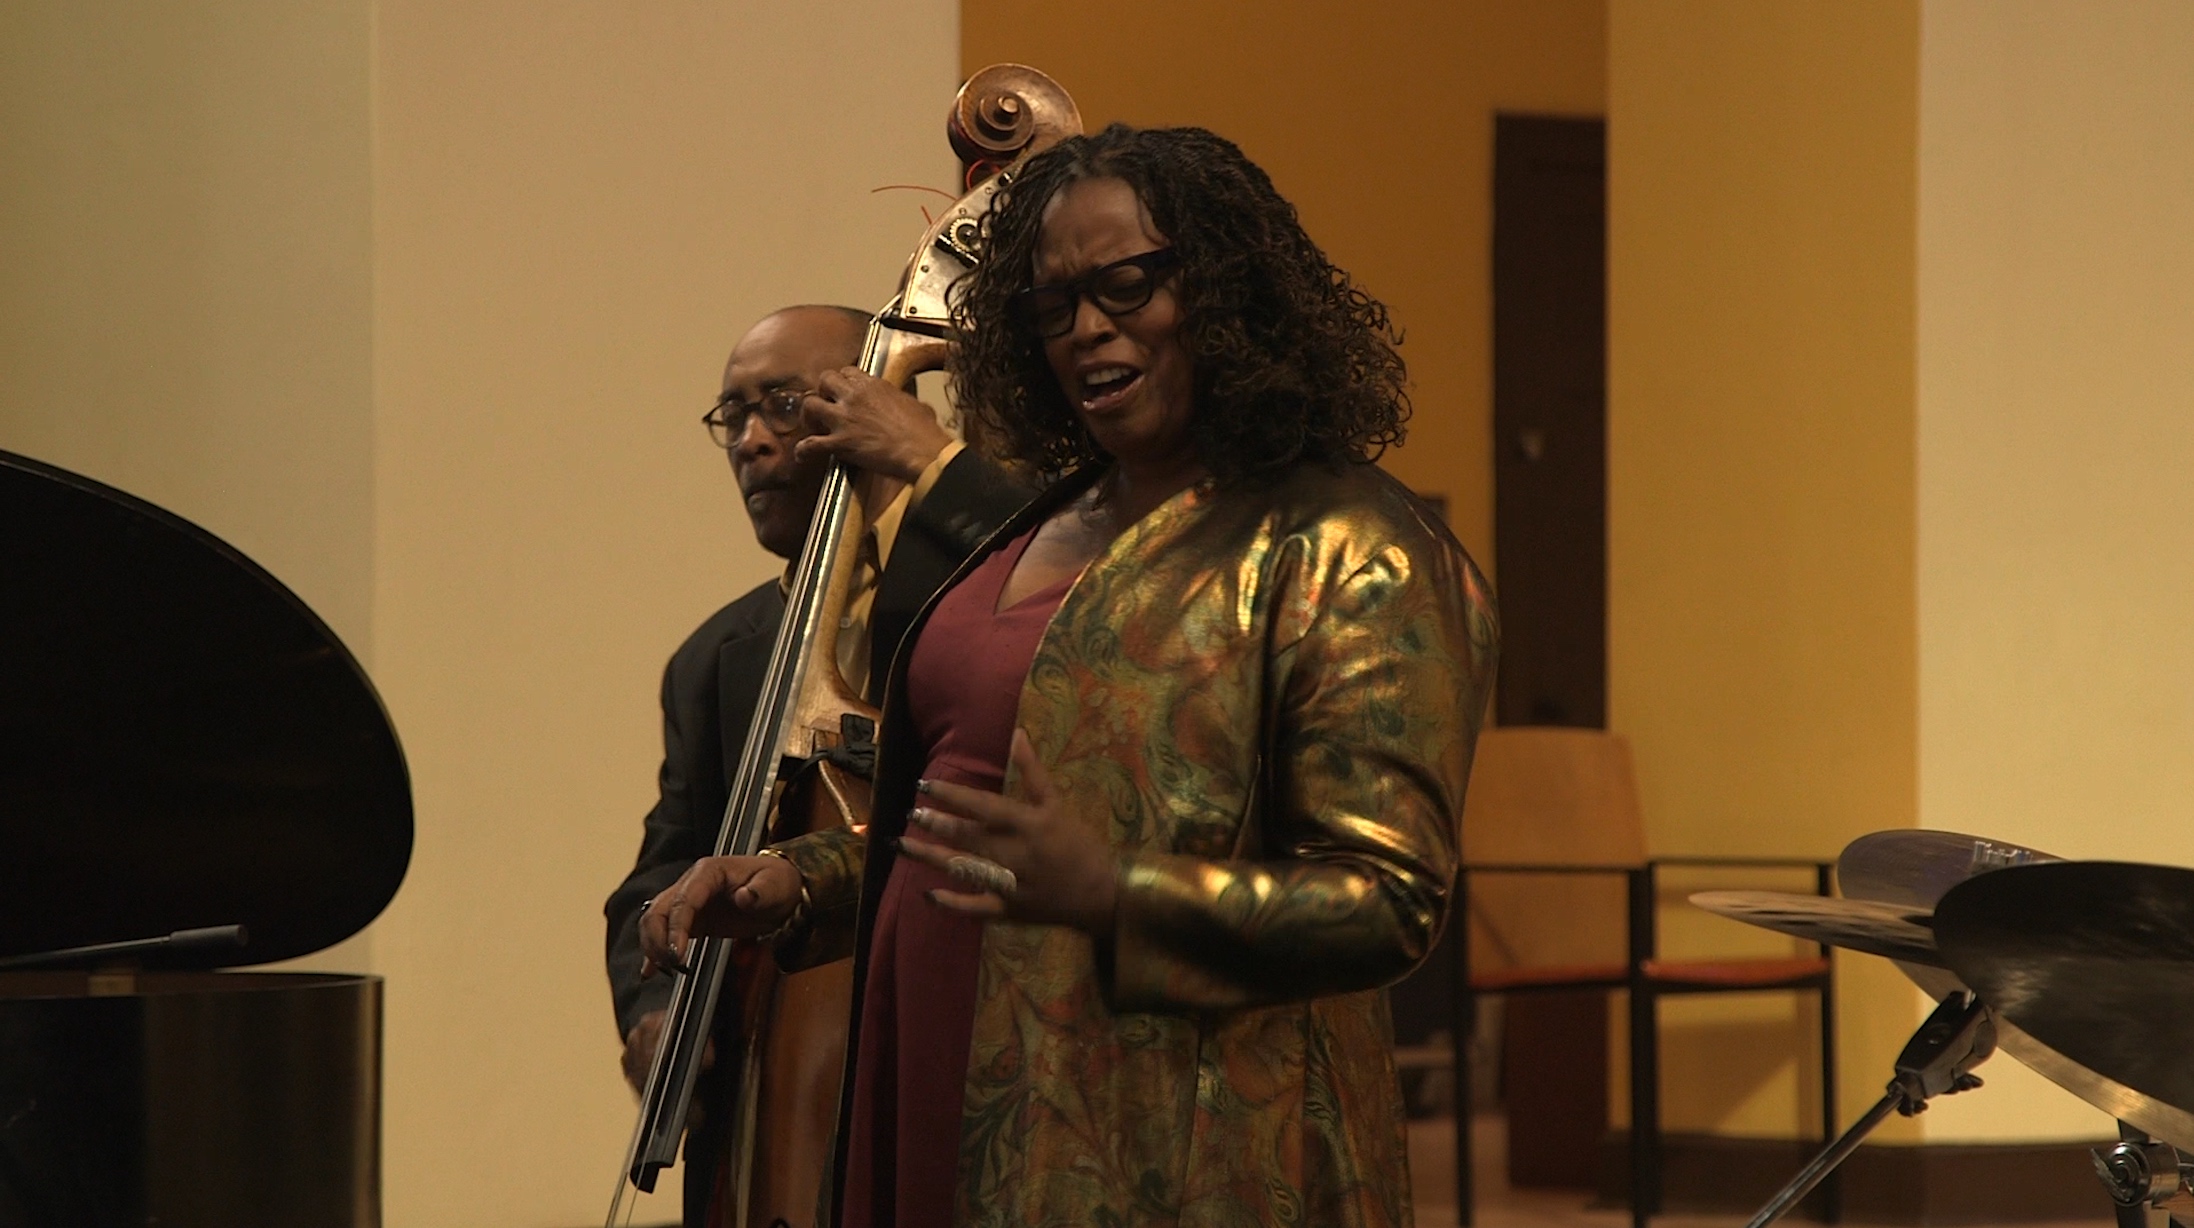 Dianne Reeves brings International Jazz Day to DC’s homeless